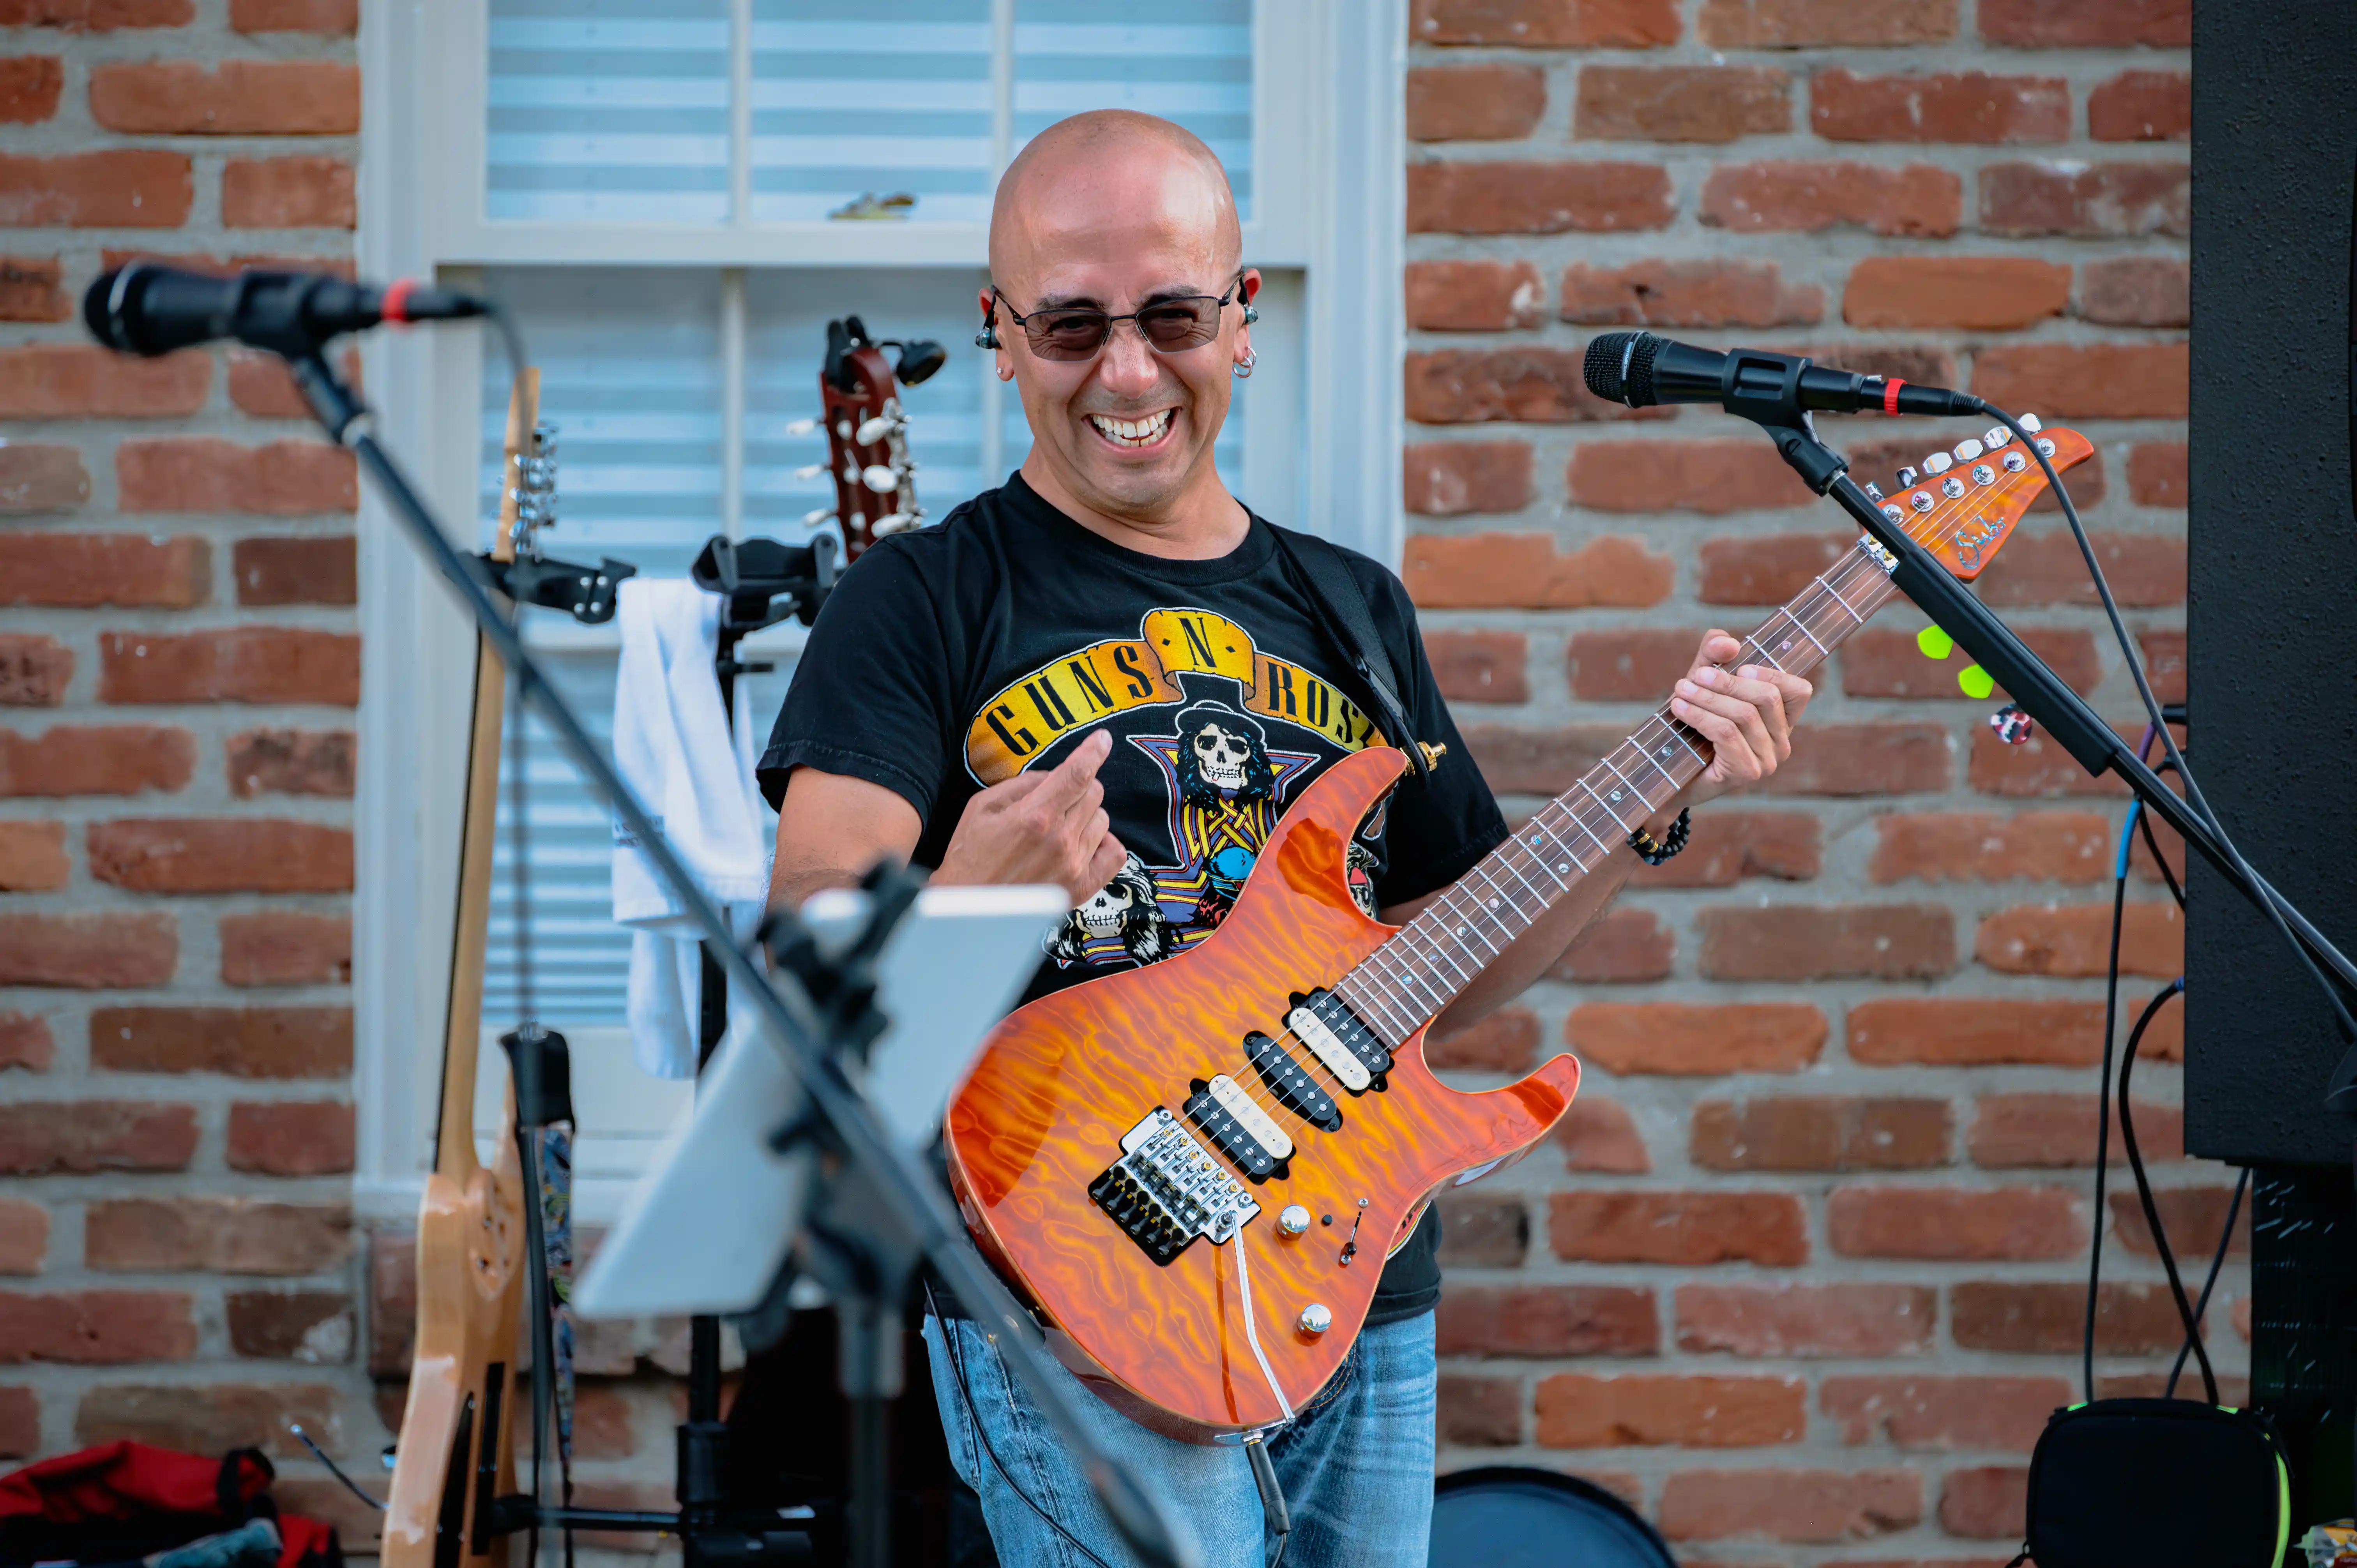 Smiling musician playing an electric guitar on stage with microphone stands and a brick wall in the background.